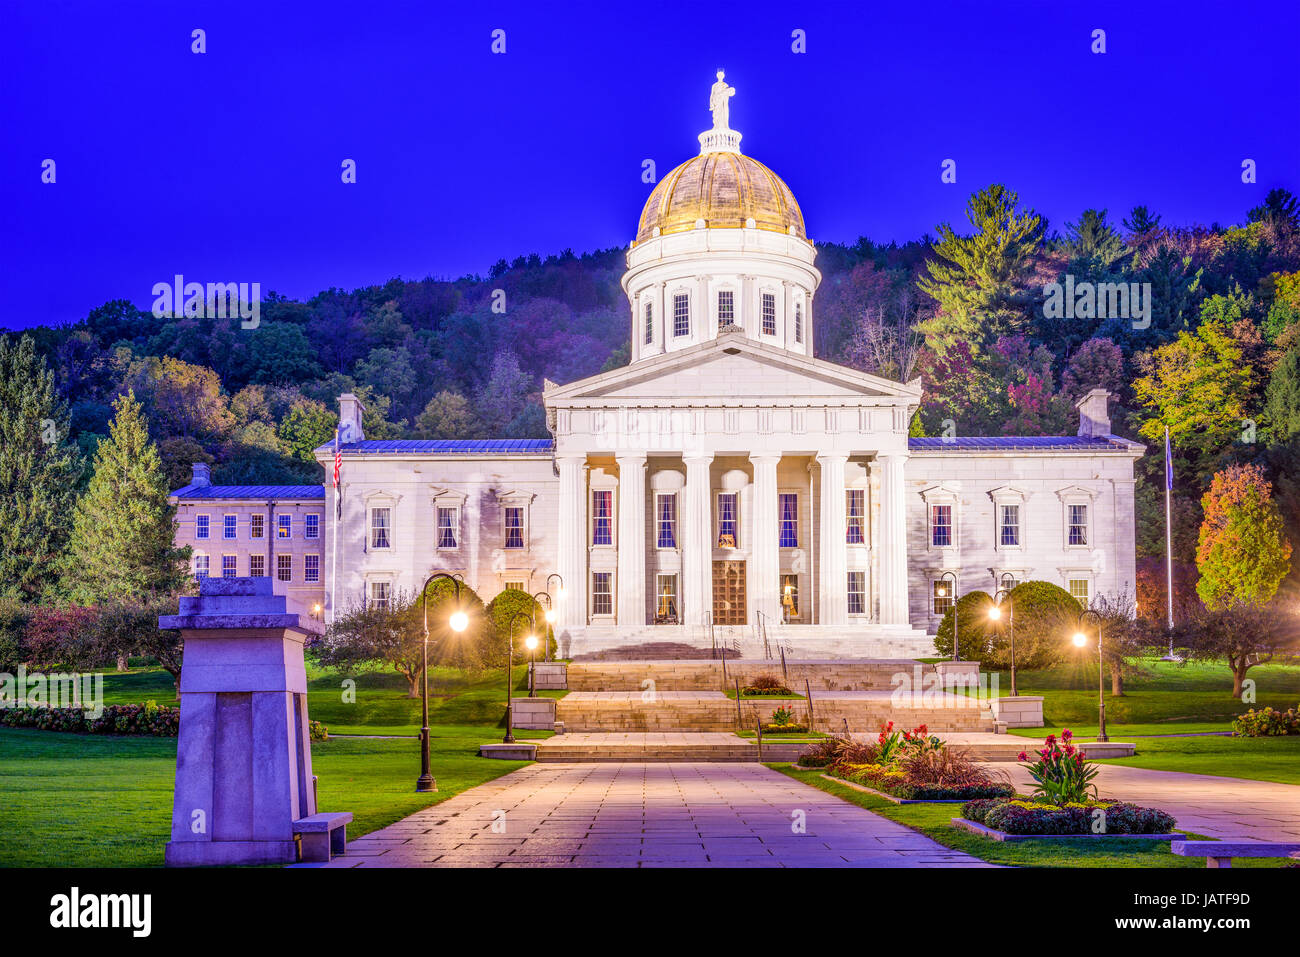 The Vermont State House in Montpelier, Vermont, USA. Stock Photo